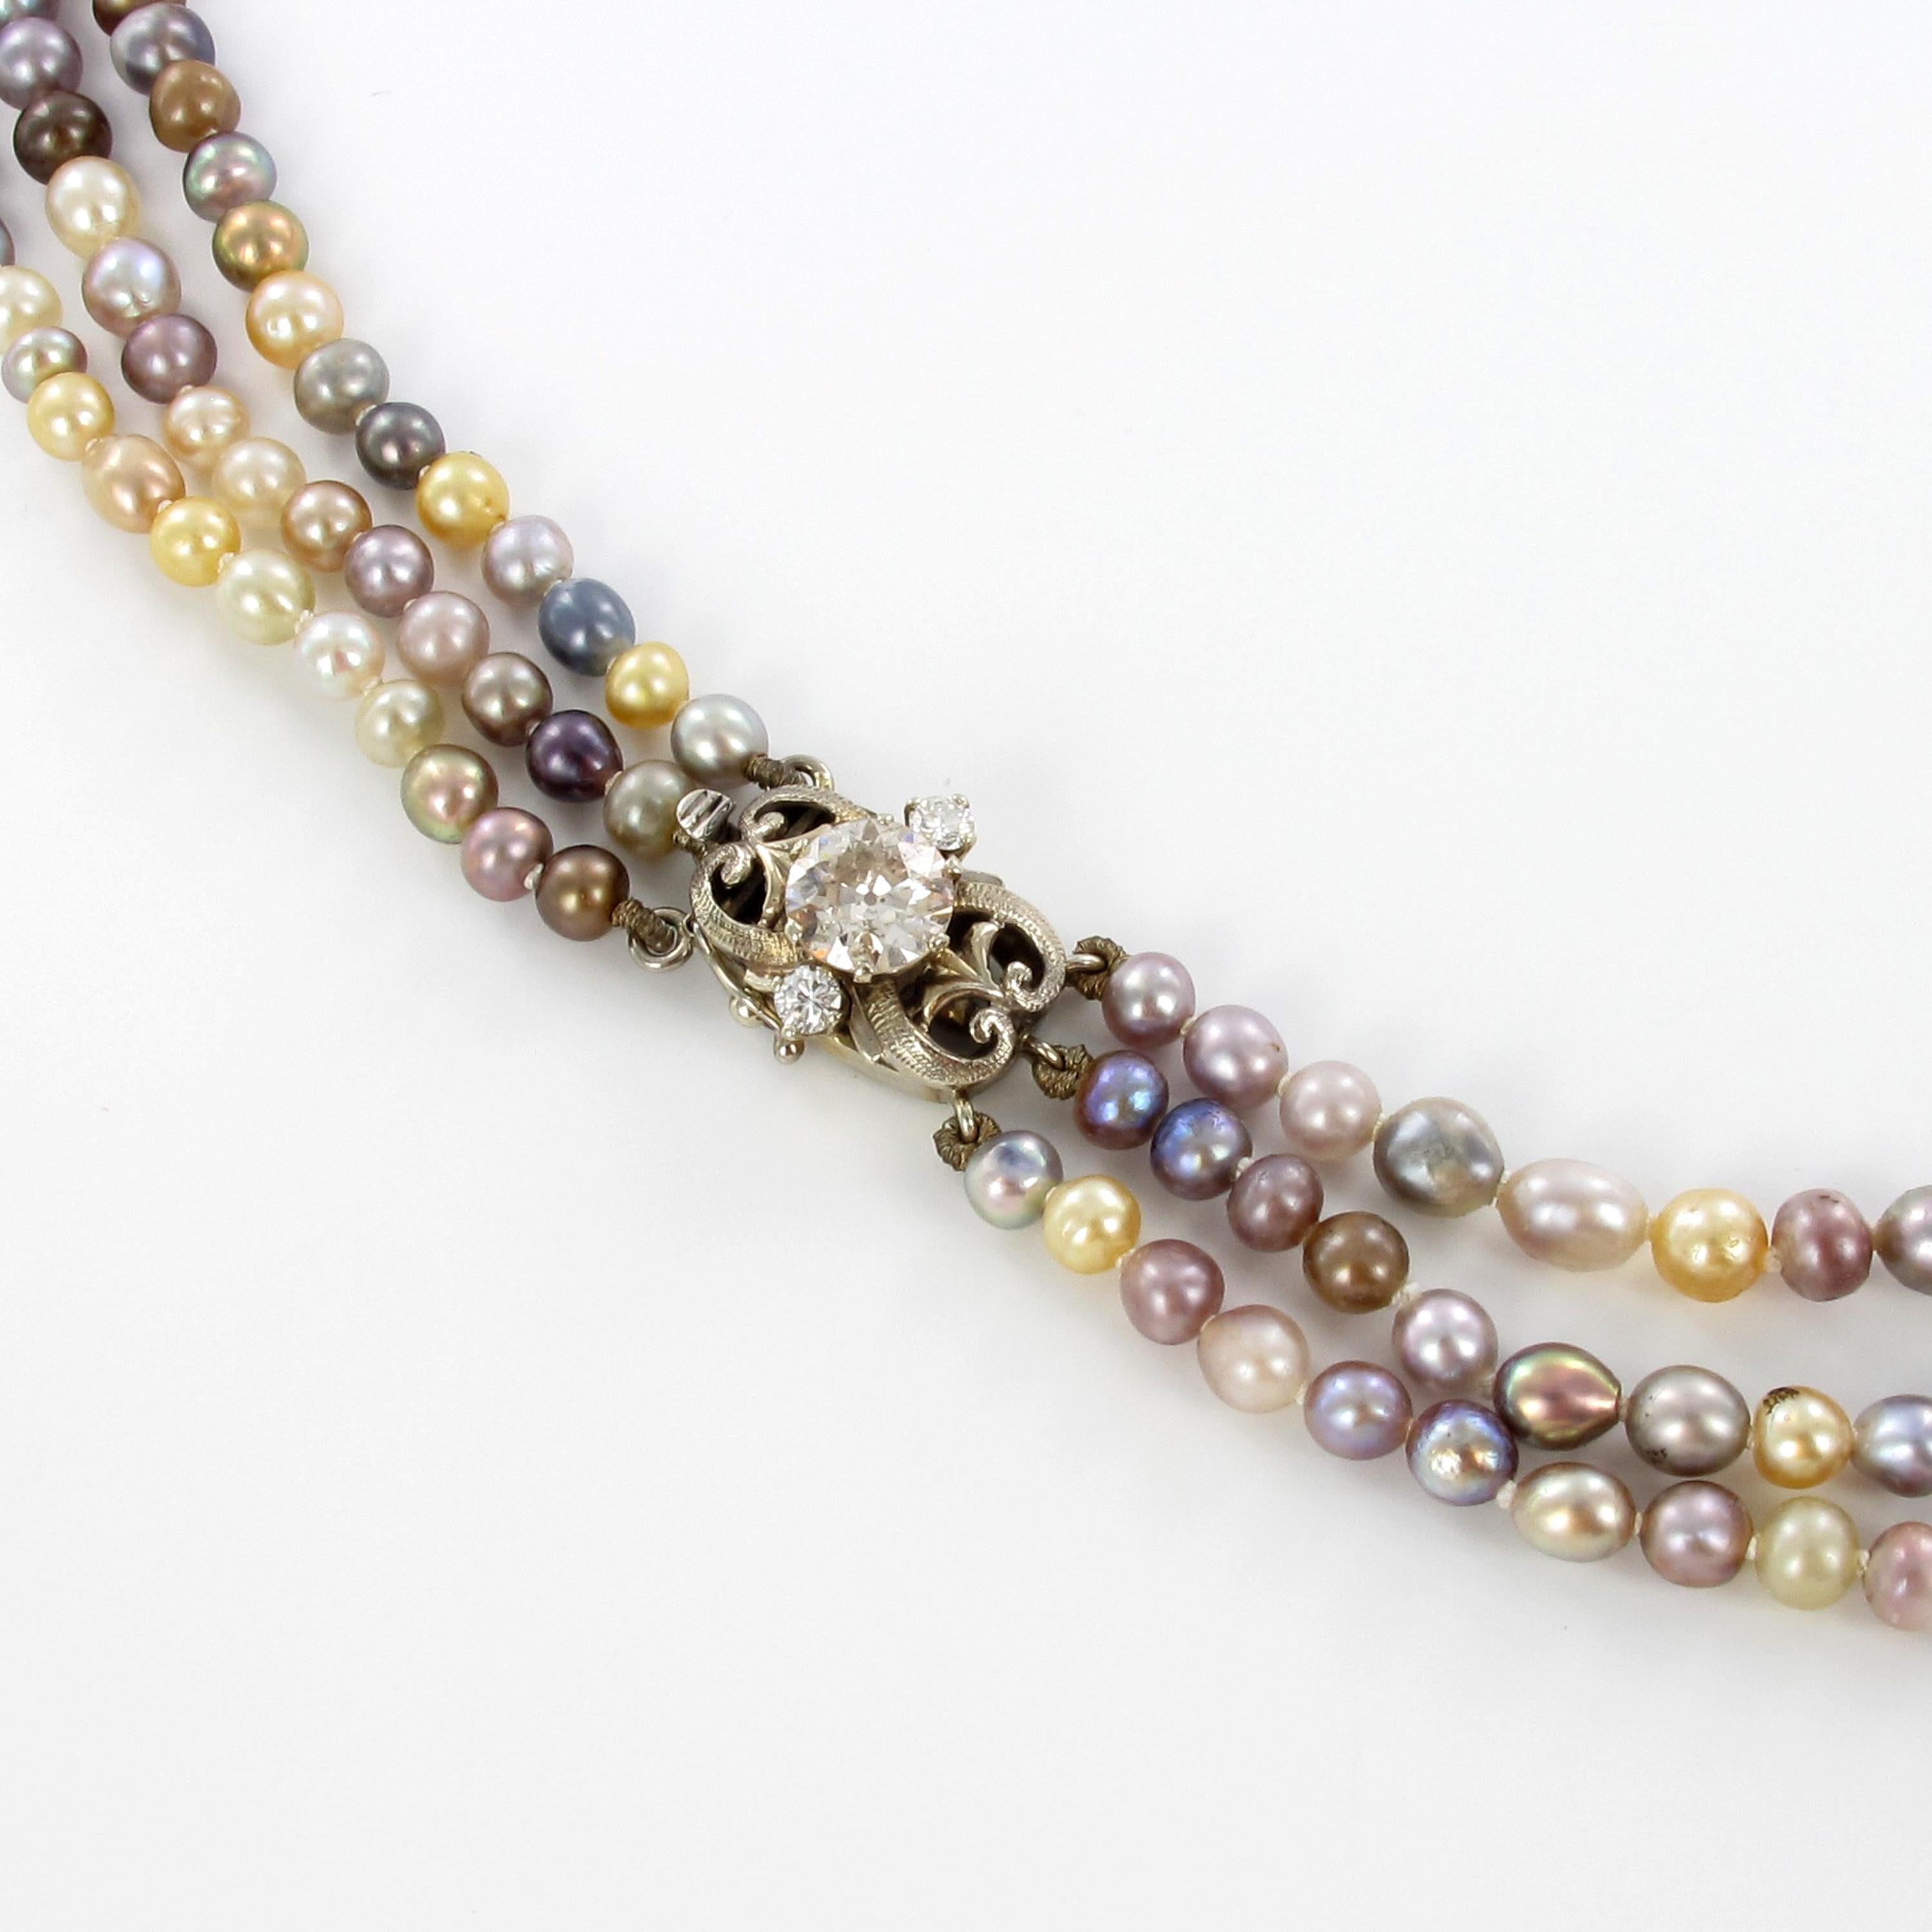 Old European Cut Spectacular 3-Strand Multicolored Natural Pearl Diamond Necklace For Sale